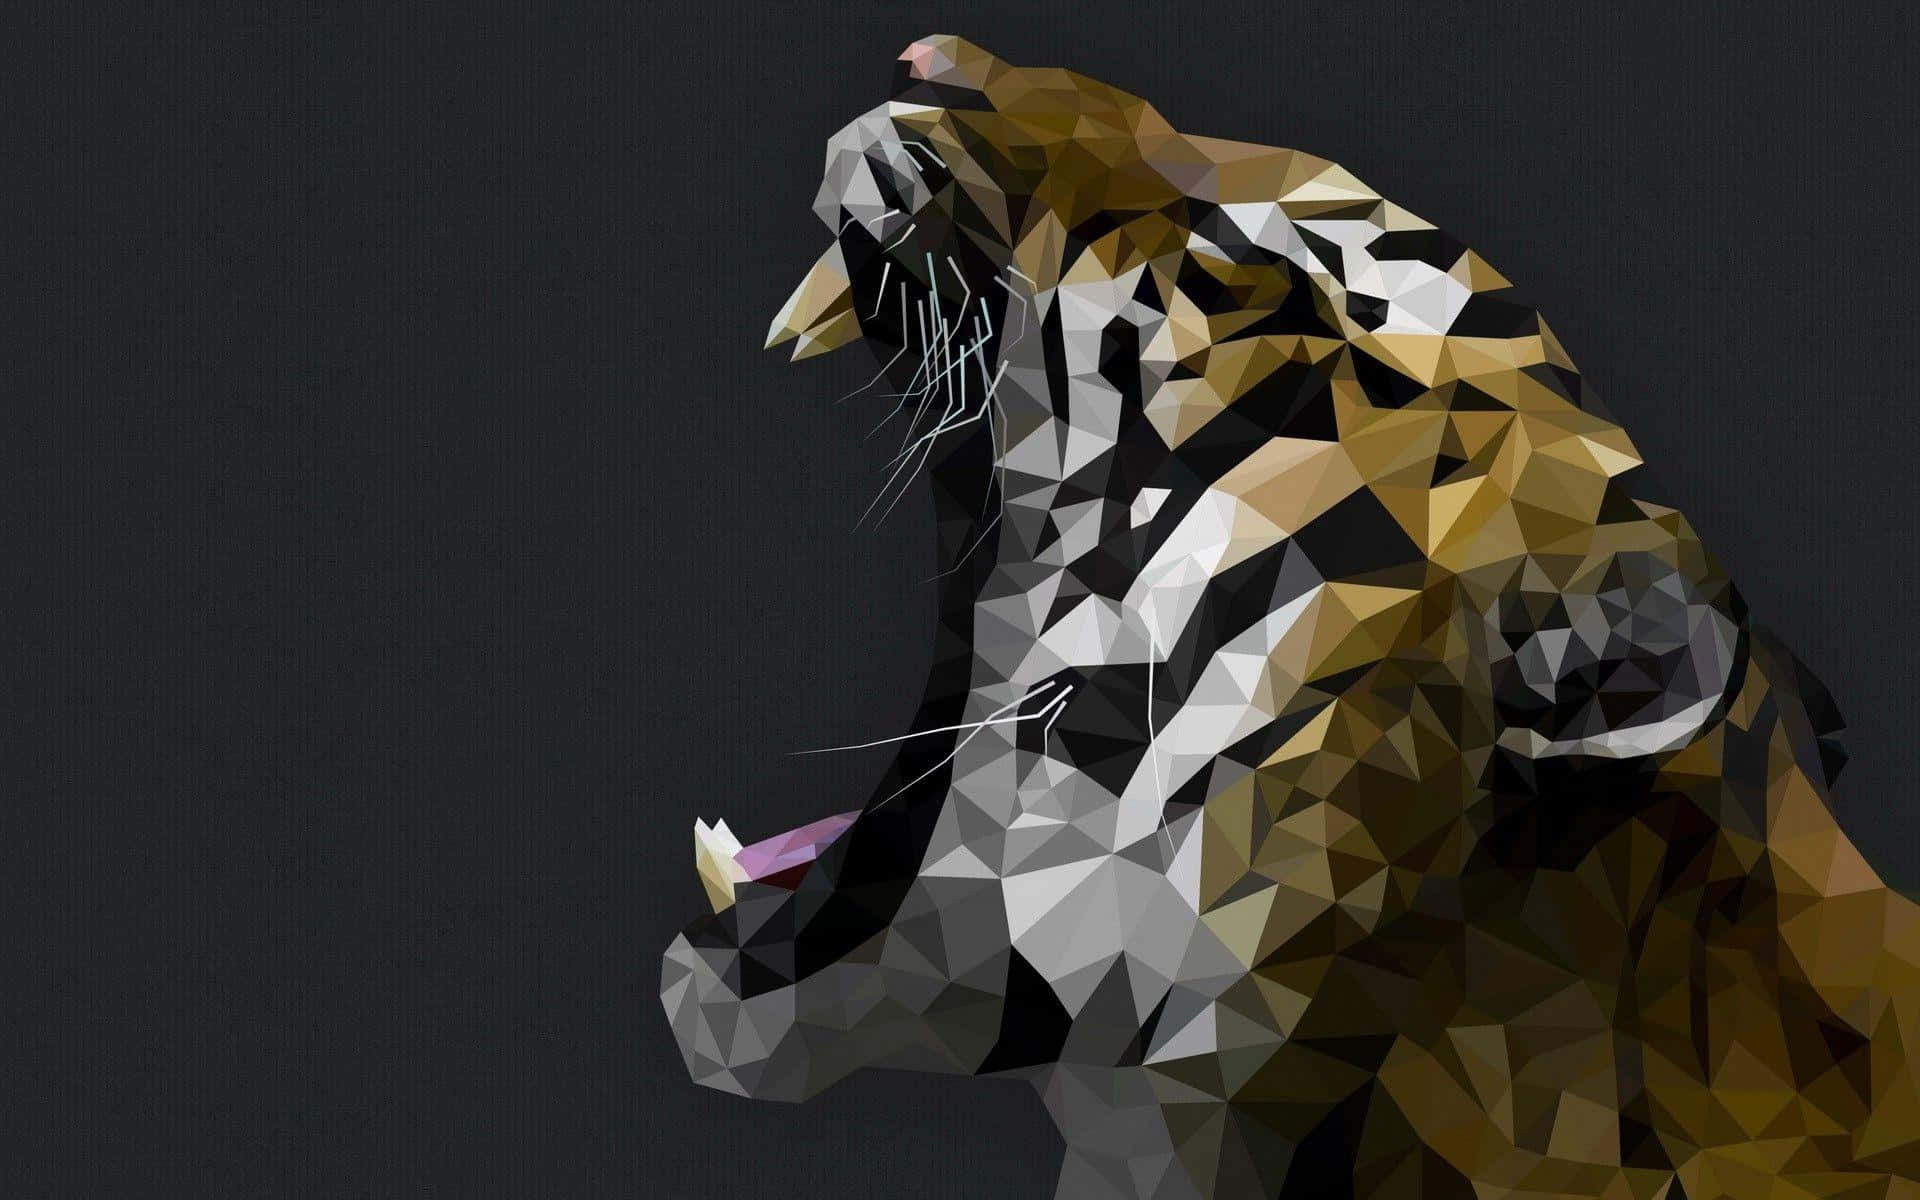 A Tiger Is Shown In A Low Polygonal Style